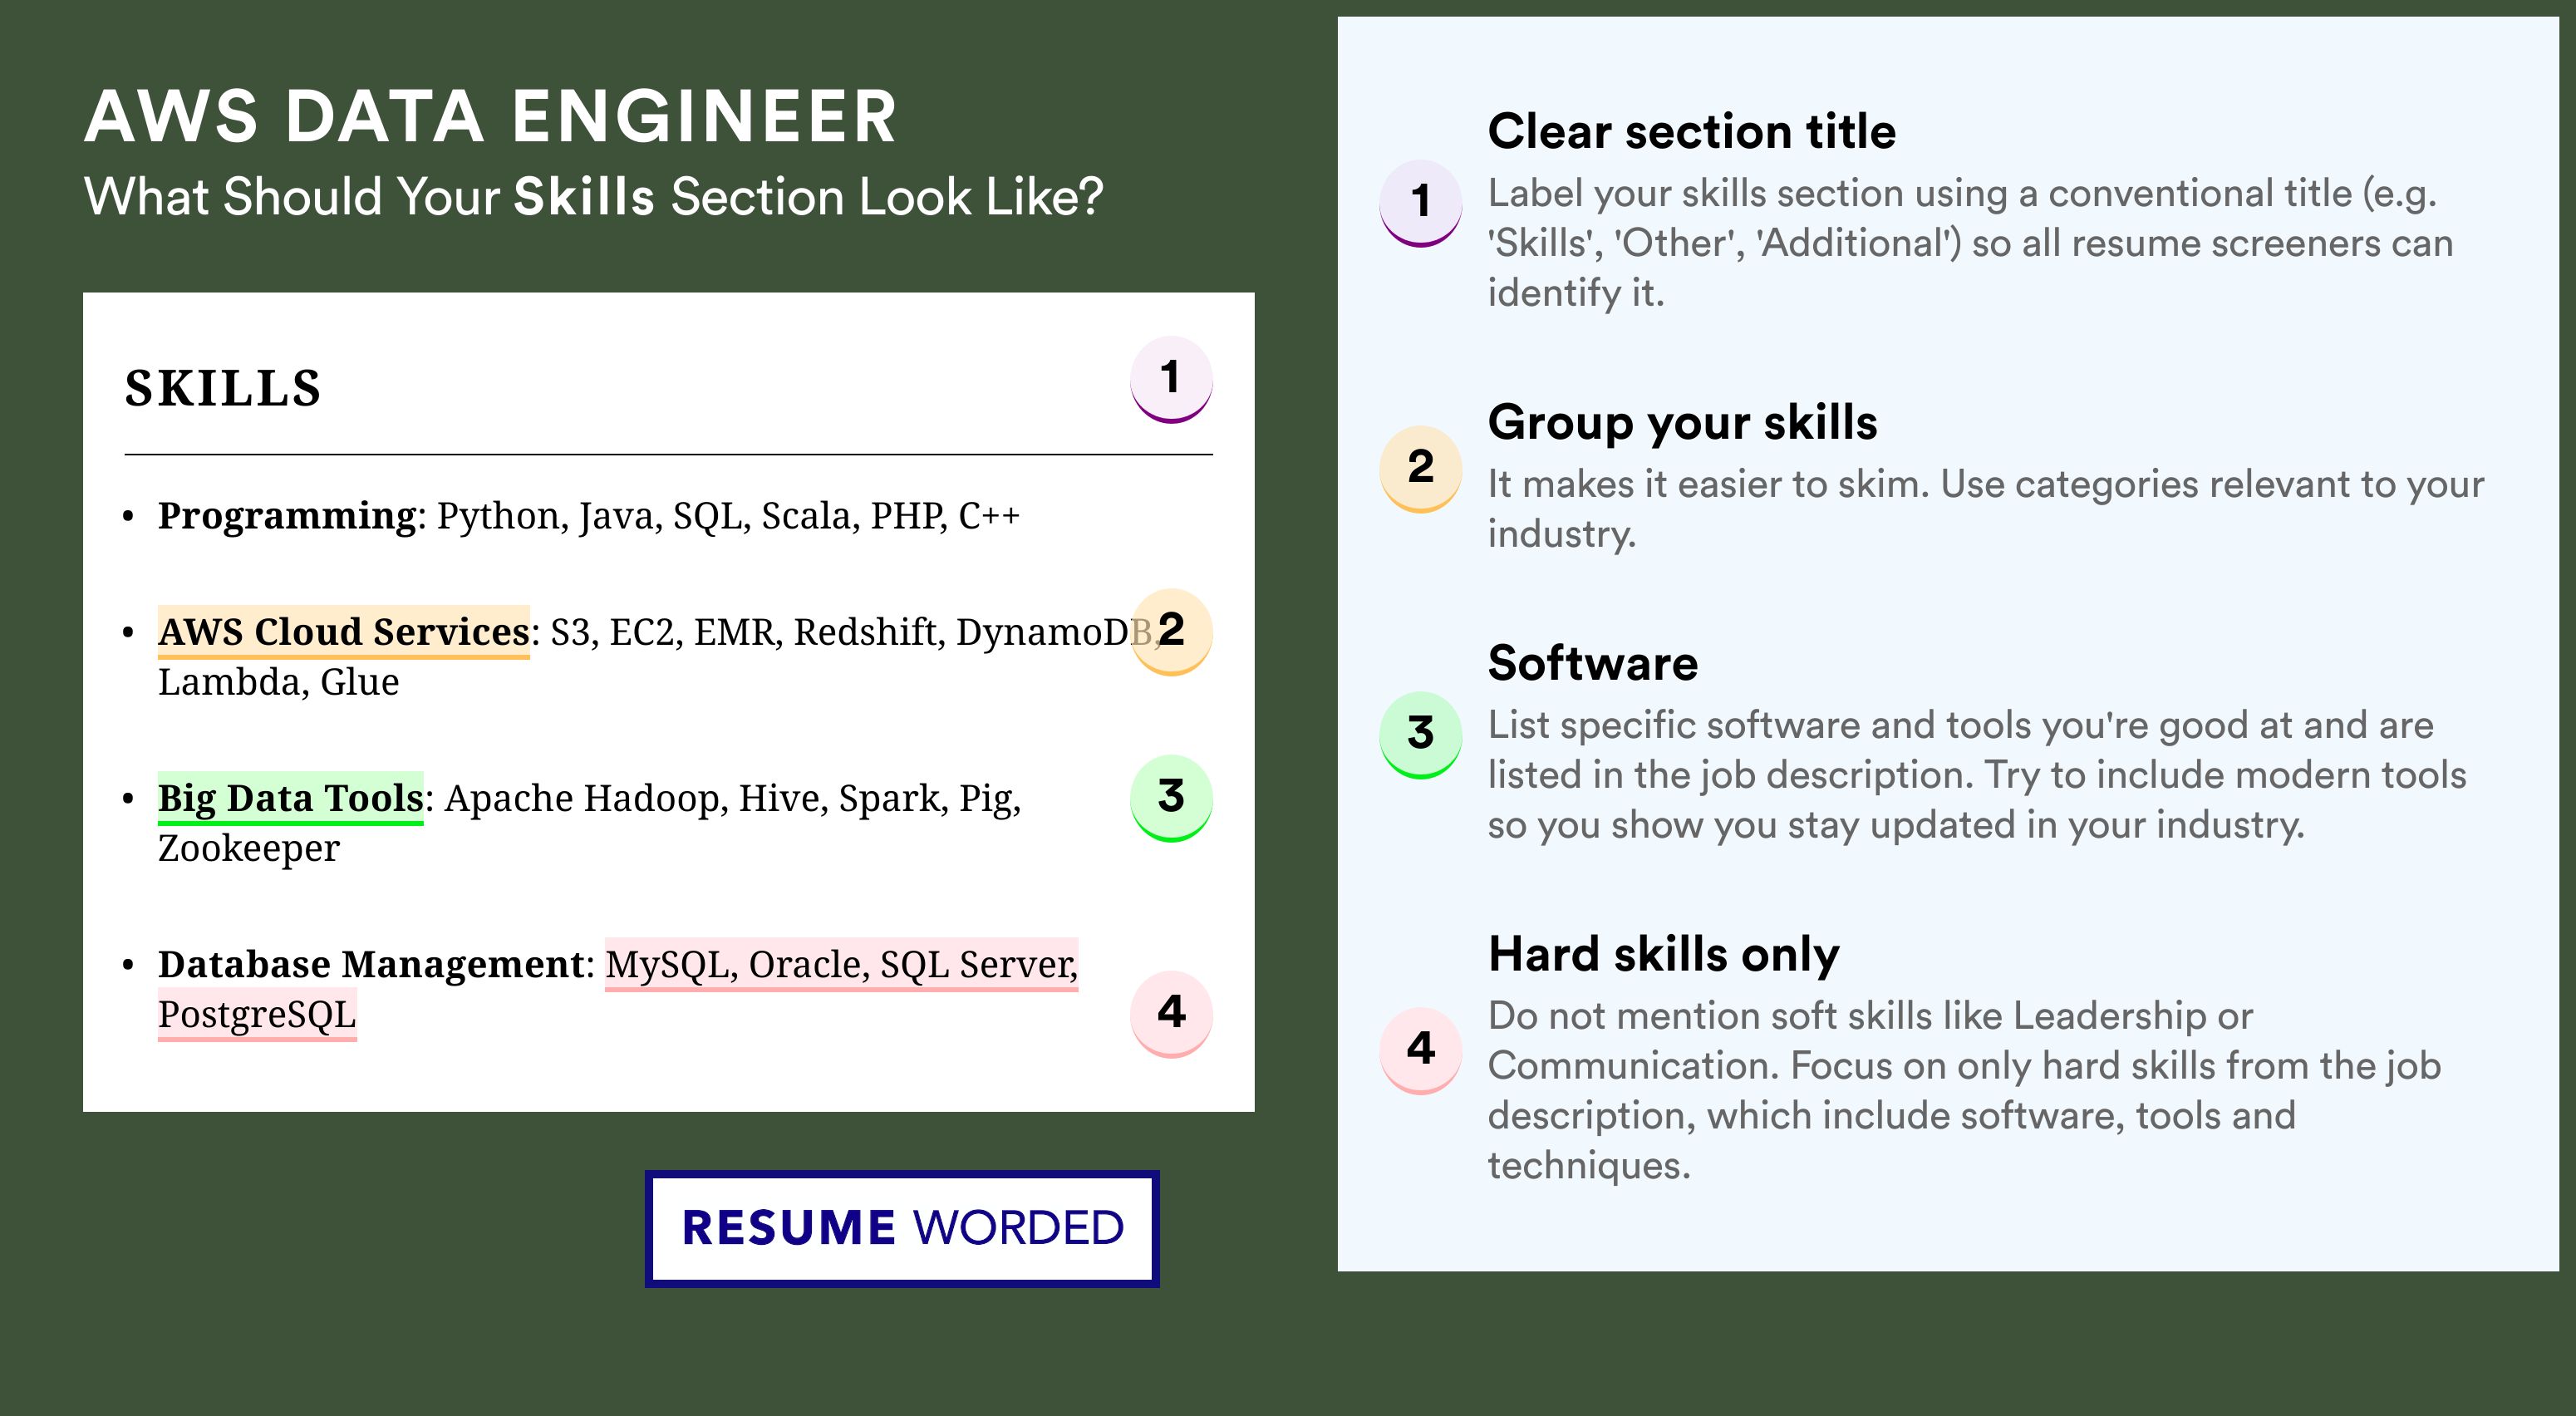 How To Write Your Skills Section - AWS Data Engineer Roles